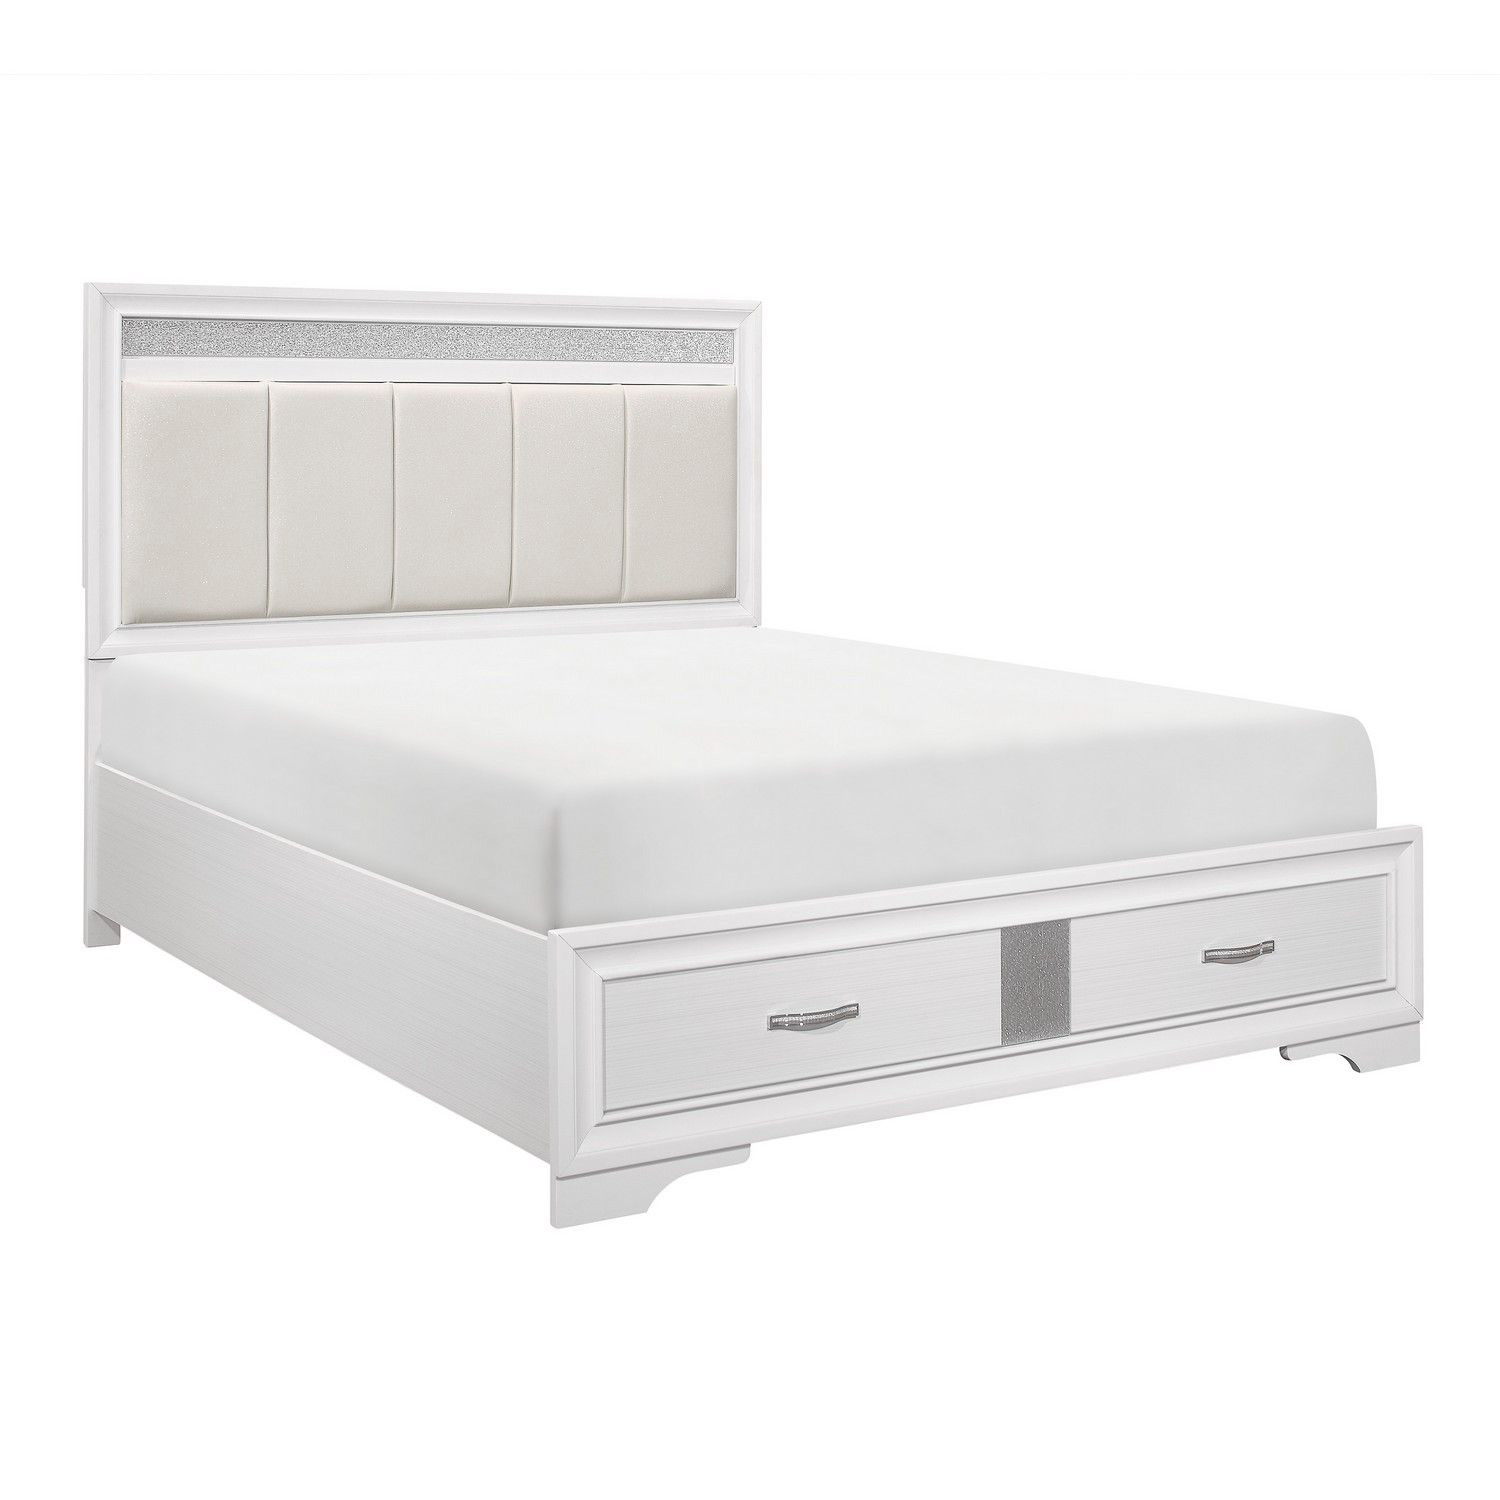 Homelegance Luster Platform Bed - Two-tone : White And Silver Glitter